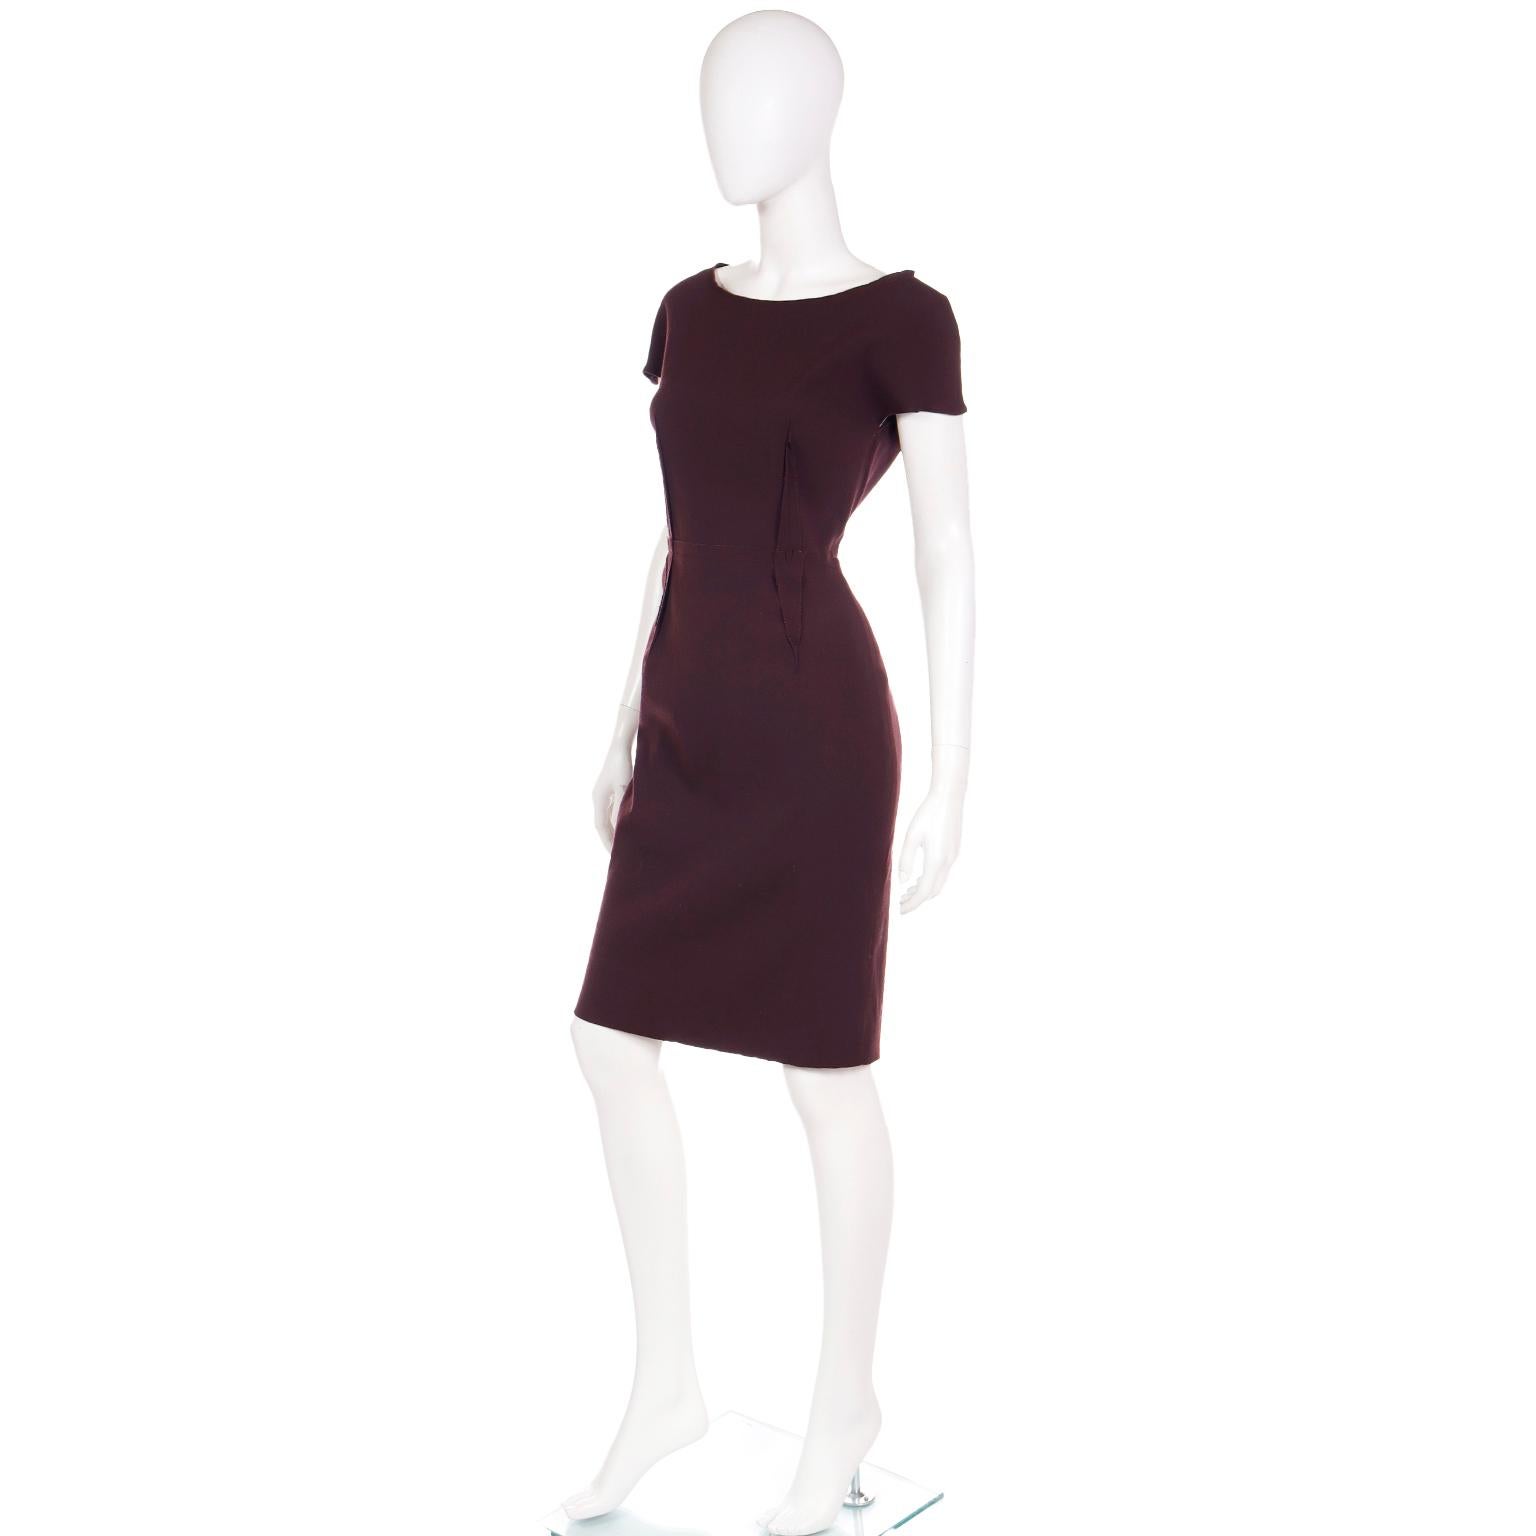 Lanvin Alber Elbaz Fall Winter 2011 Burgundy Deconstructed Short Sleeve Dress In Excellent Condition For Sale In Portland, OR